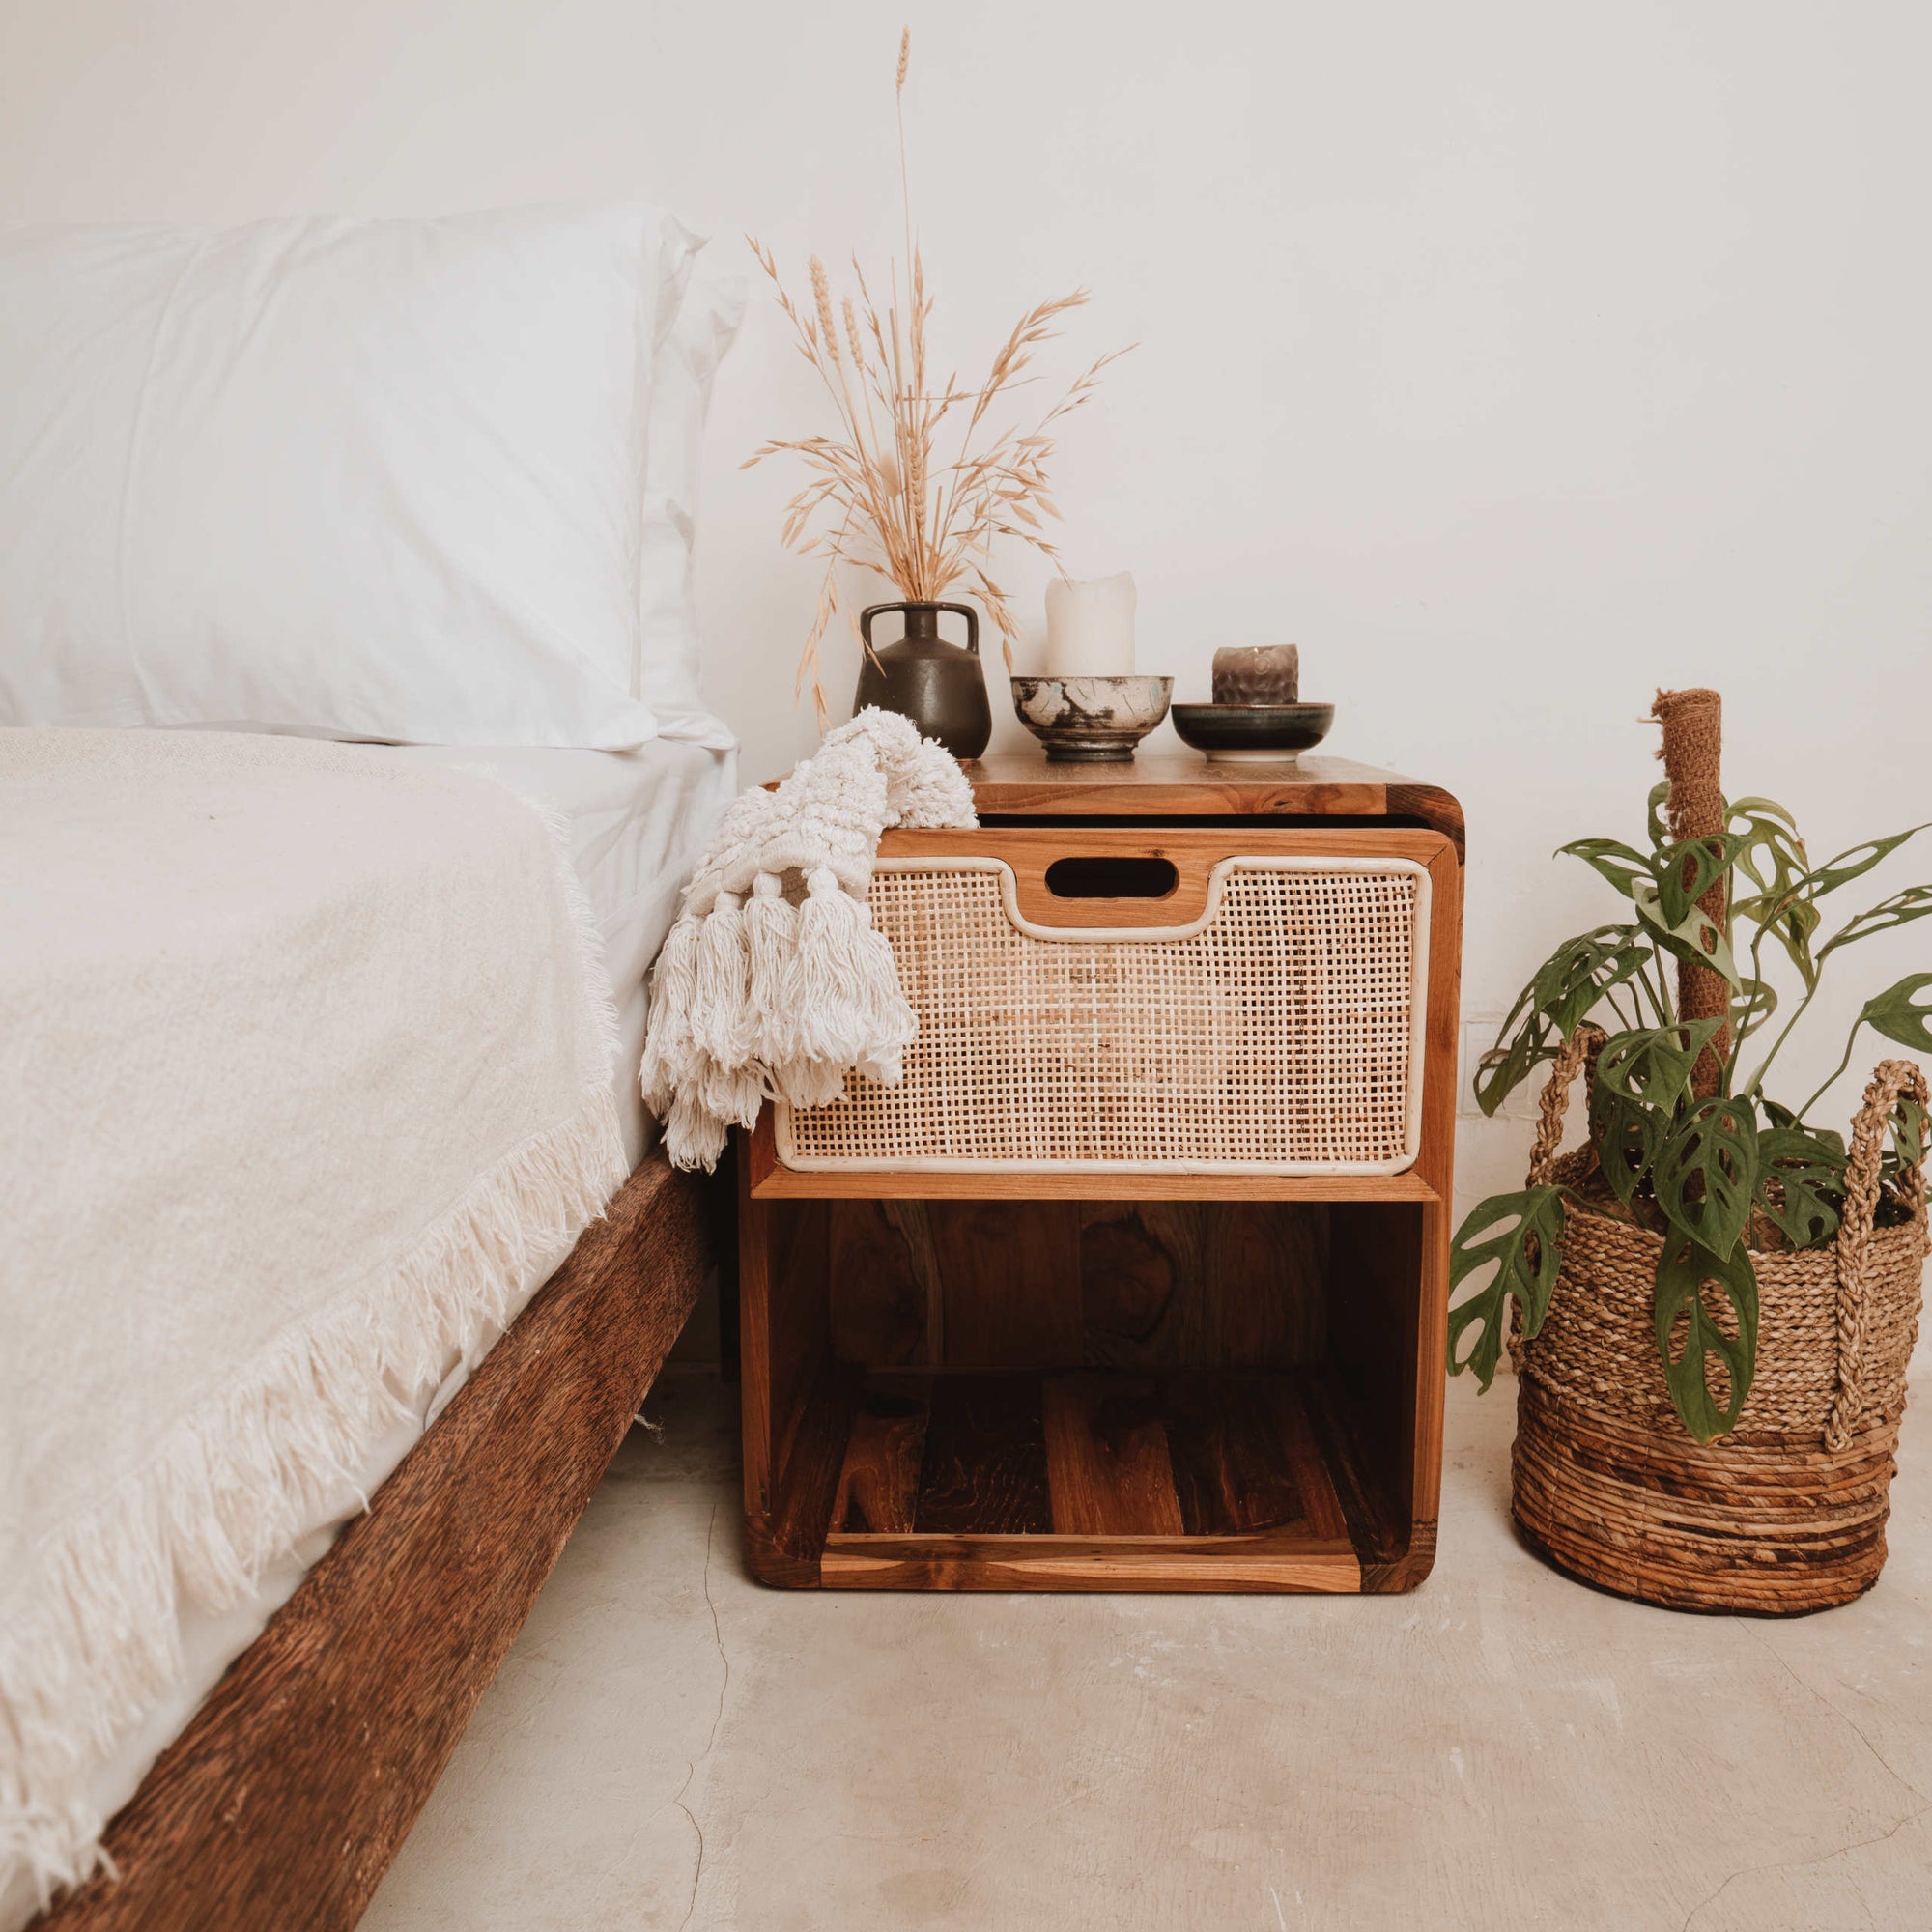 Rustic Handmade Bed Table